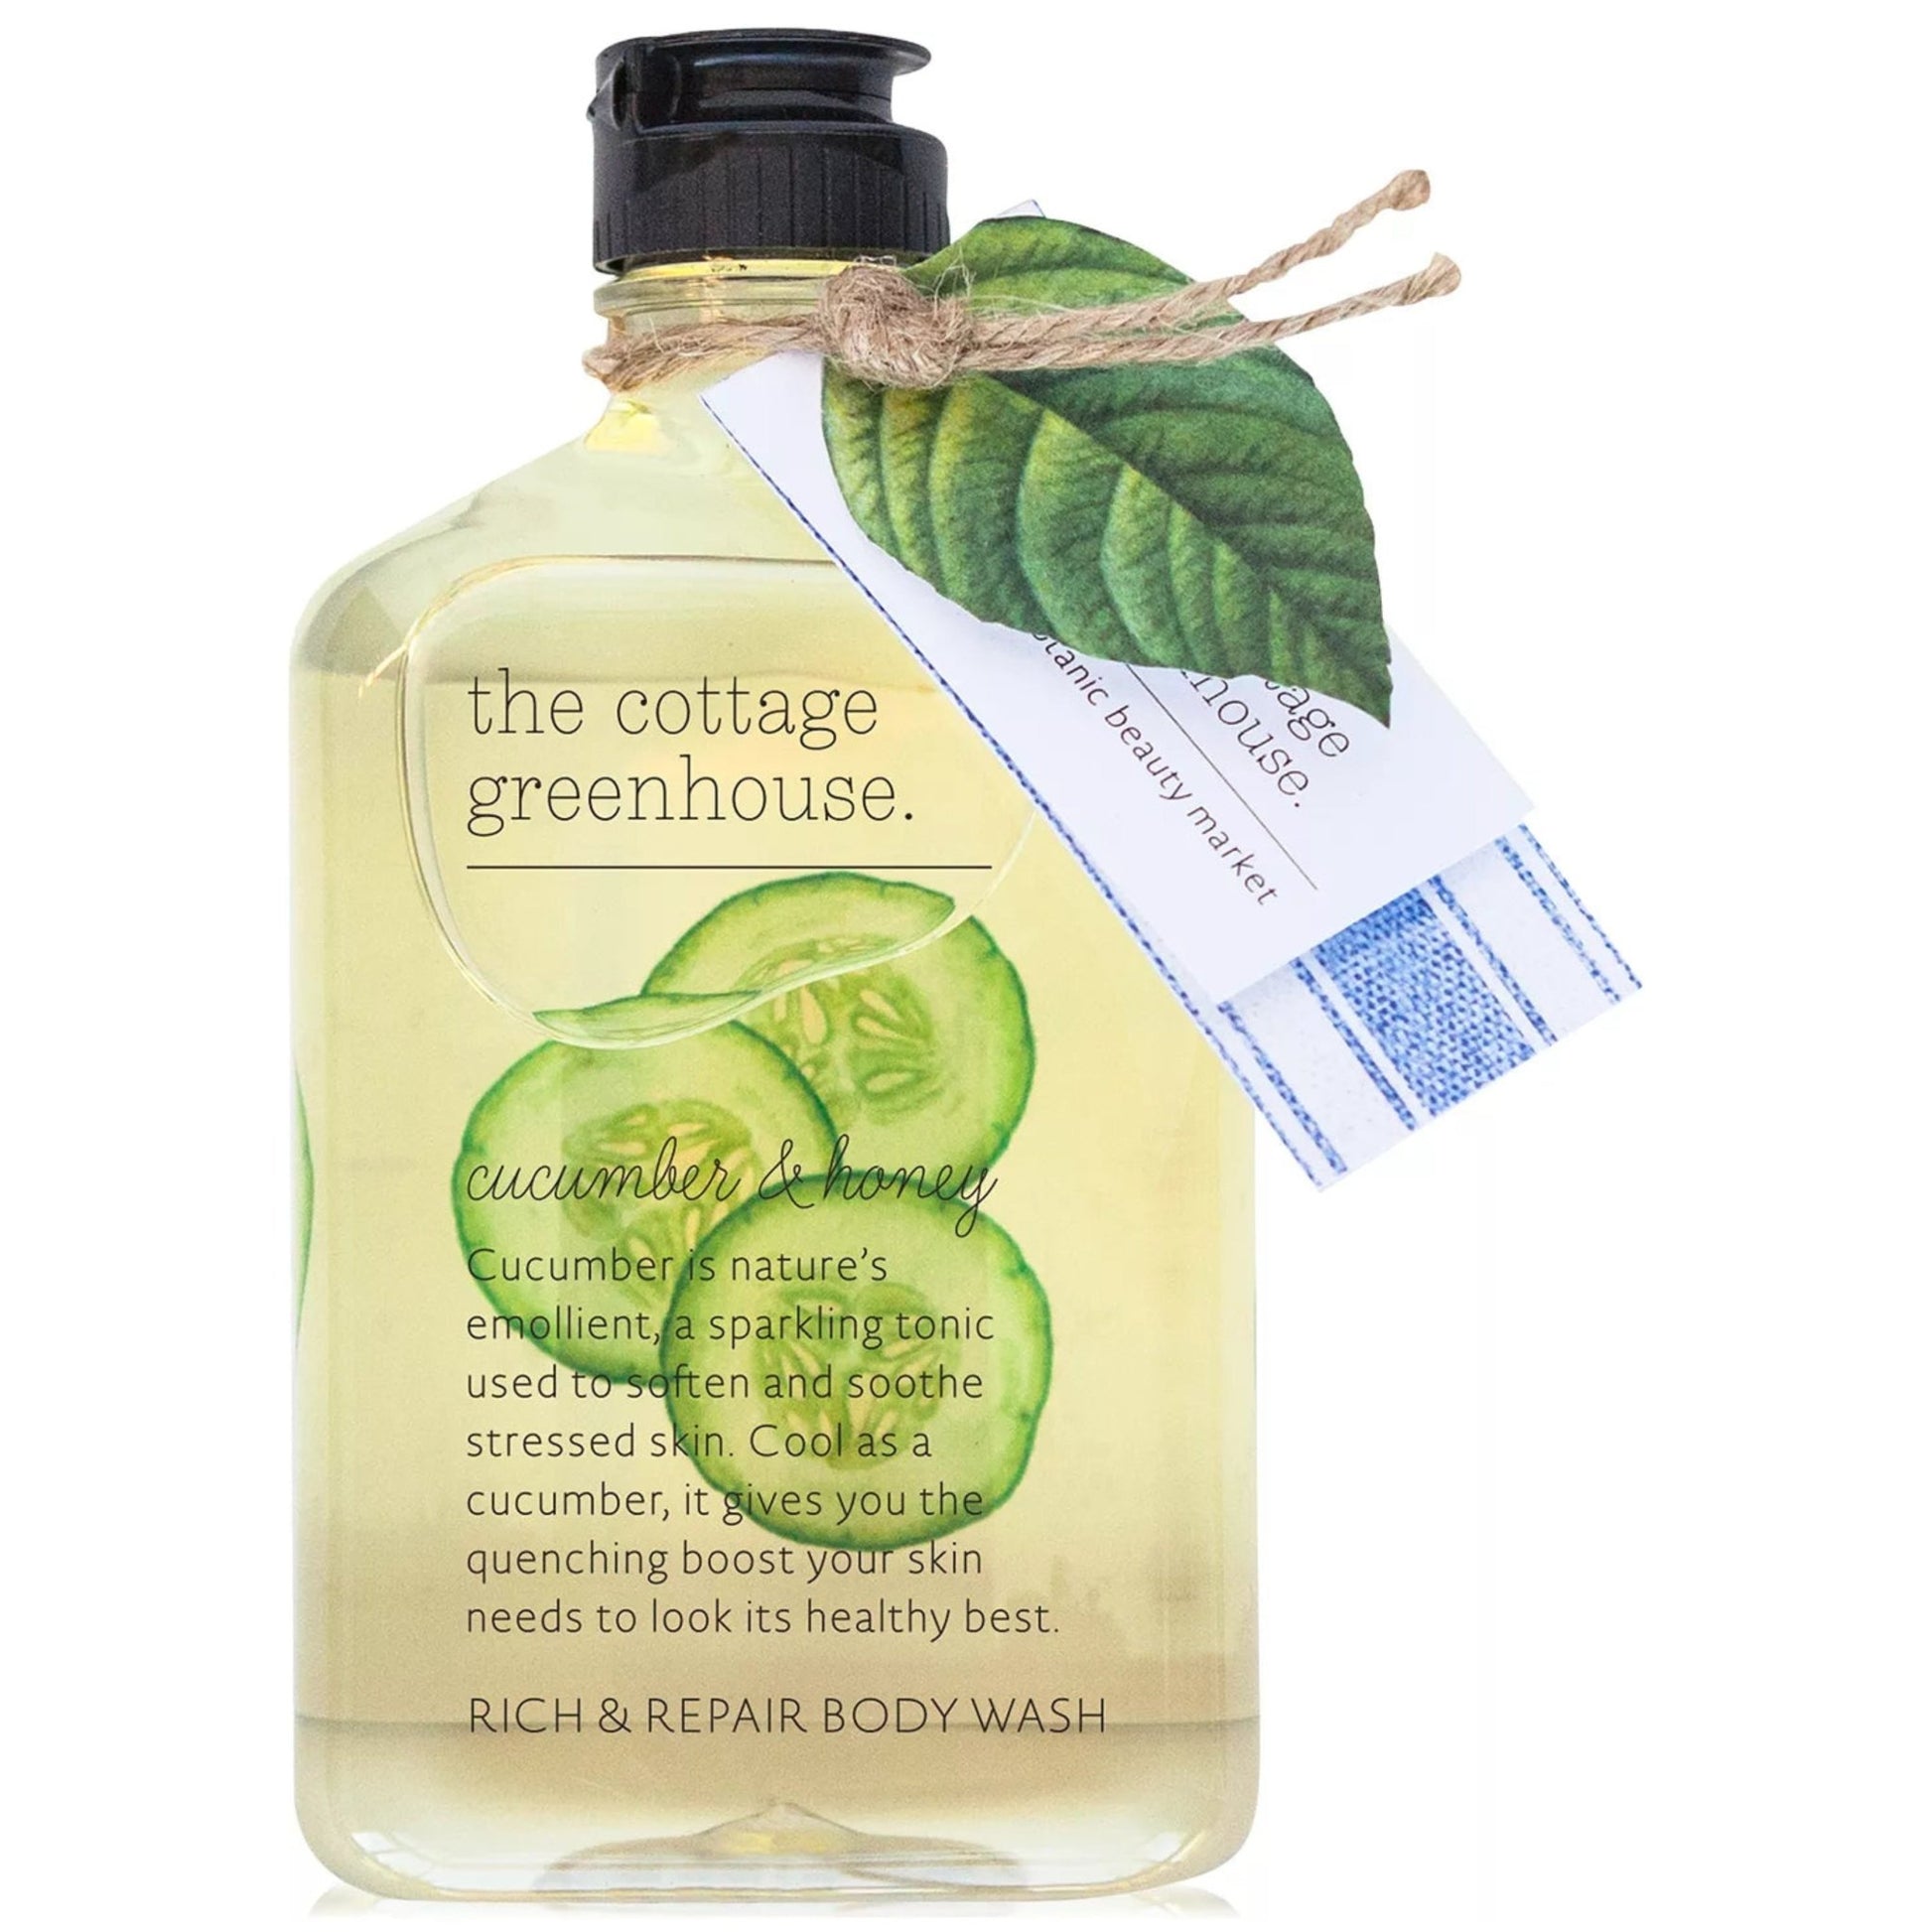 The Cottage Greenhouse-Body Wash Cucumber & Honey Body - The Cottage Greenhouse (340 mL) - Brandat Outlet